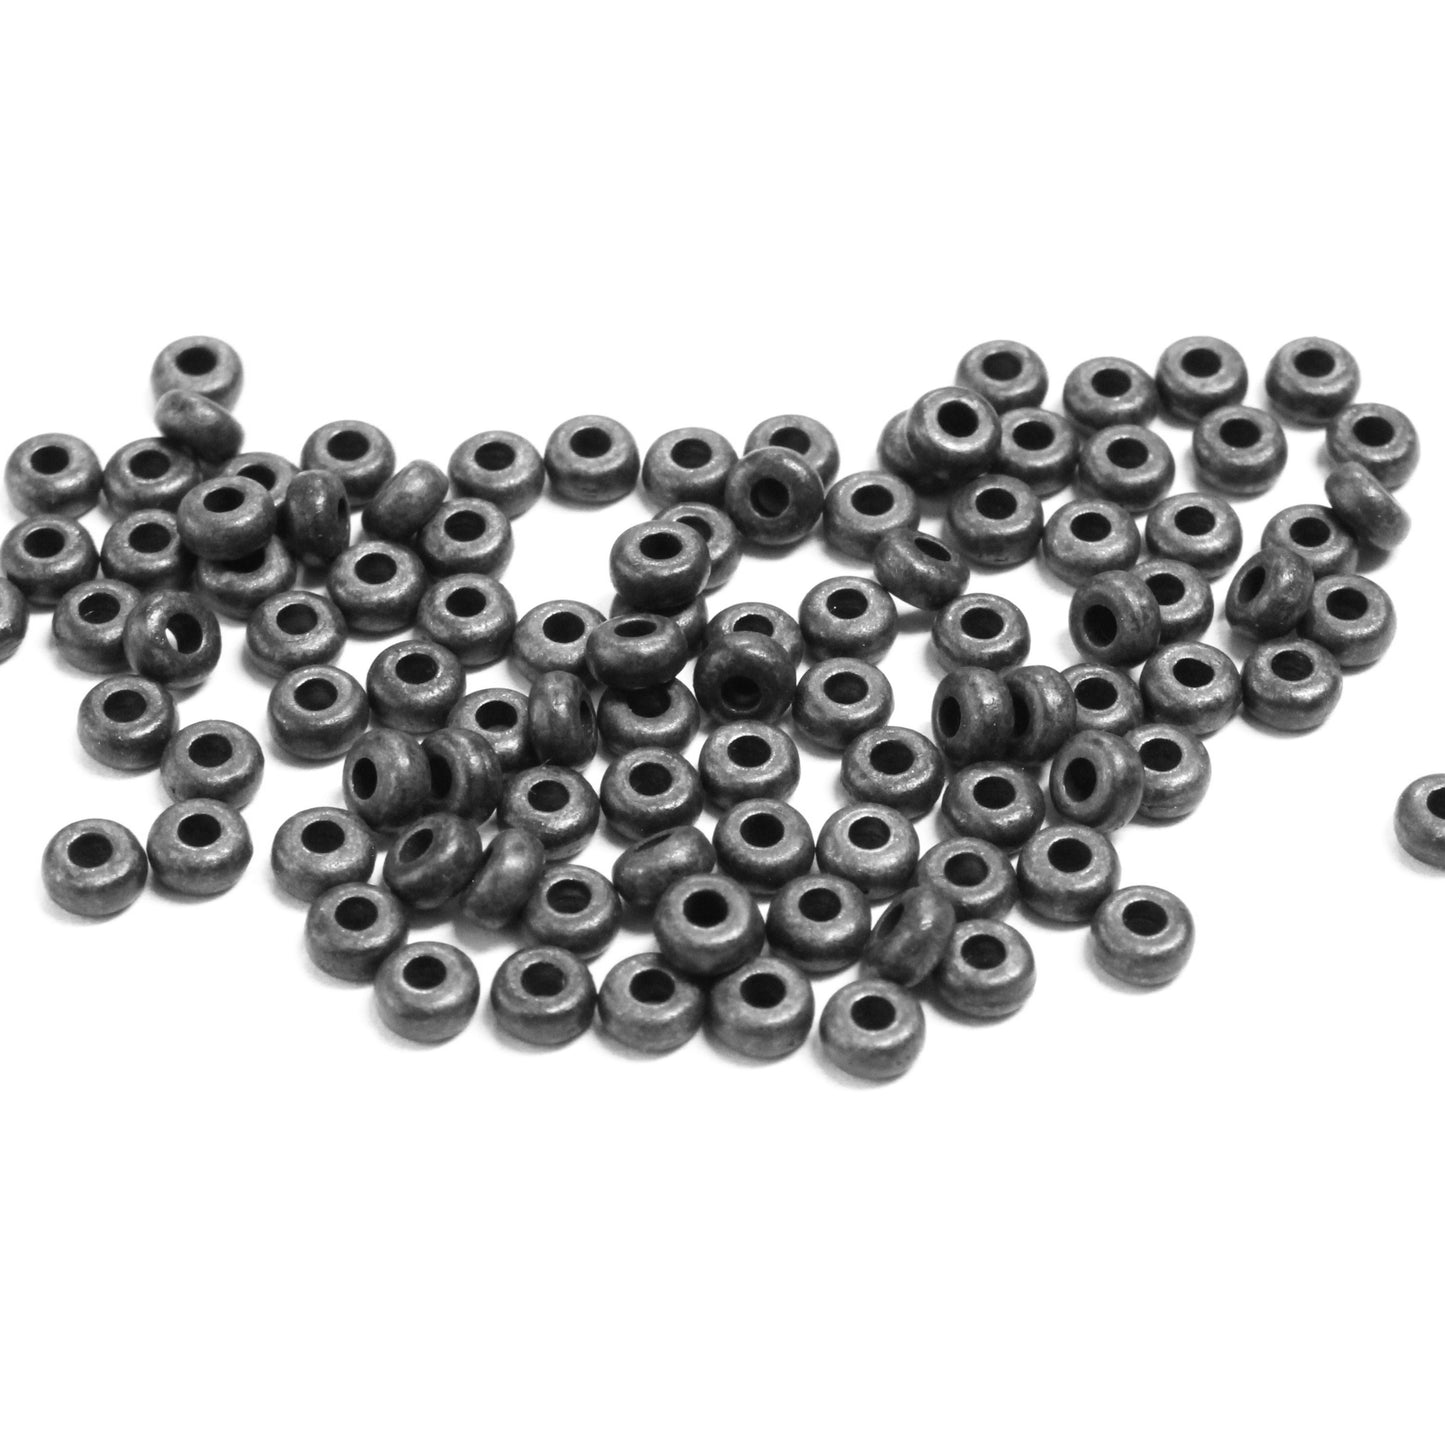 TierraCast 3mm Disk Heishi Spacer Bead / pewter with a black finish / 93-0439-13